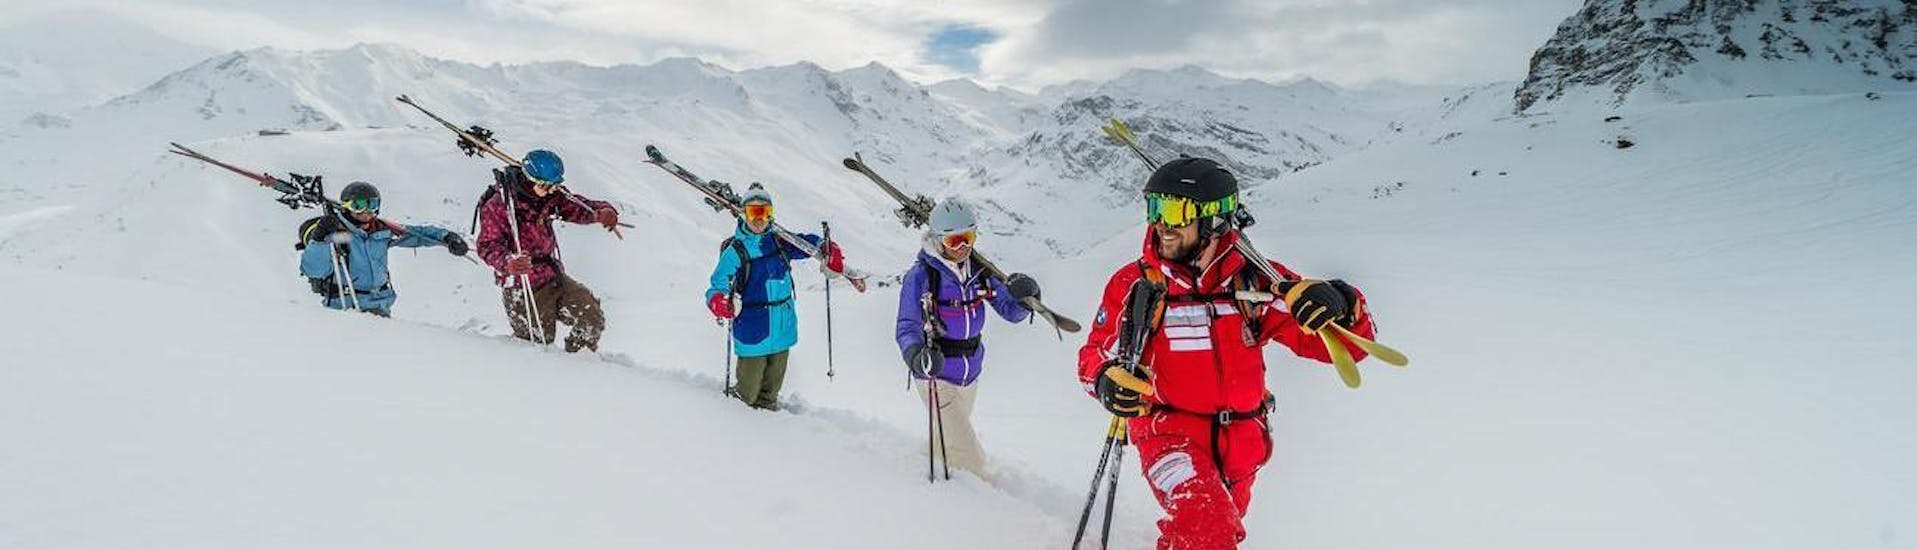 A group of ski enthusiasts shares the passion for off-piste skiing during the Private Off-Piste Skiing Lessons - All Levels while exploring the new areas with a professional instructor from ESF Val d'Isère.